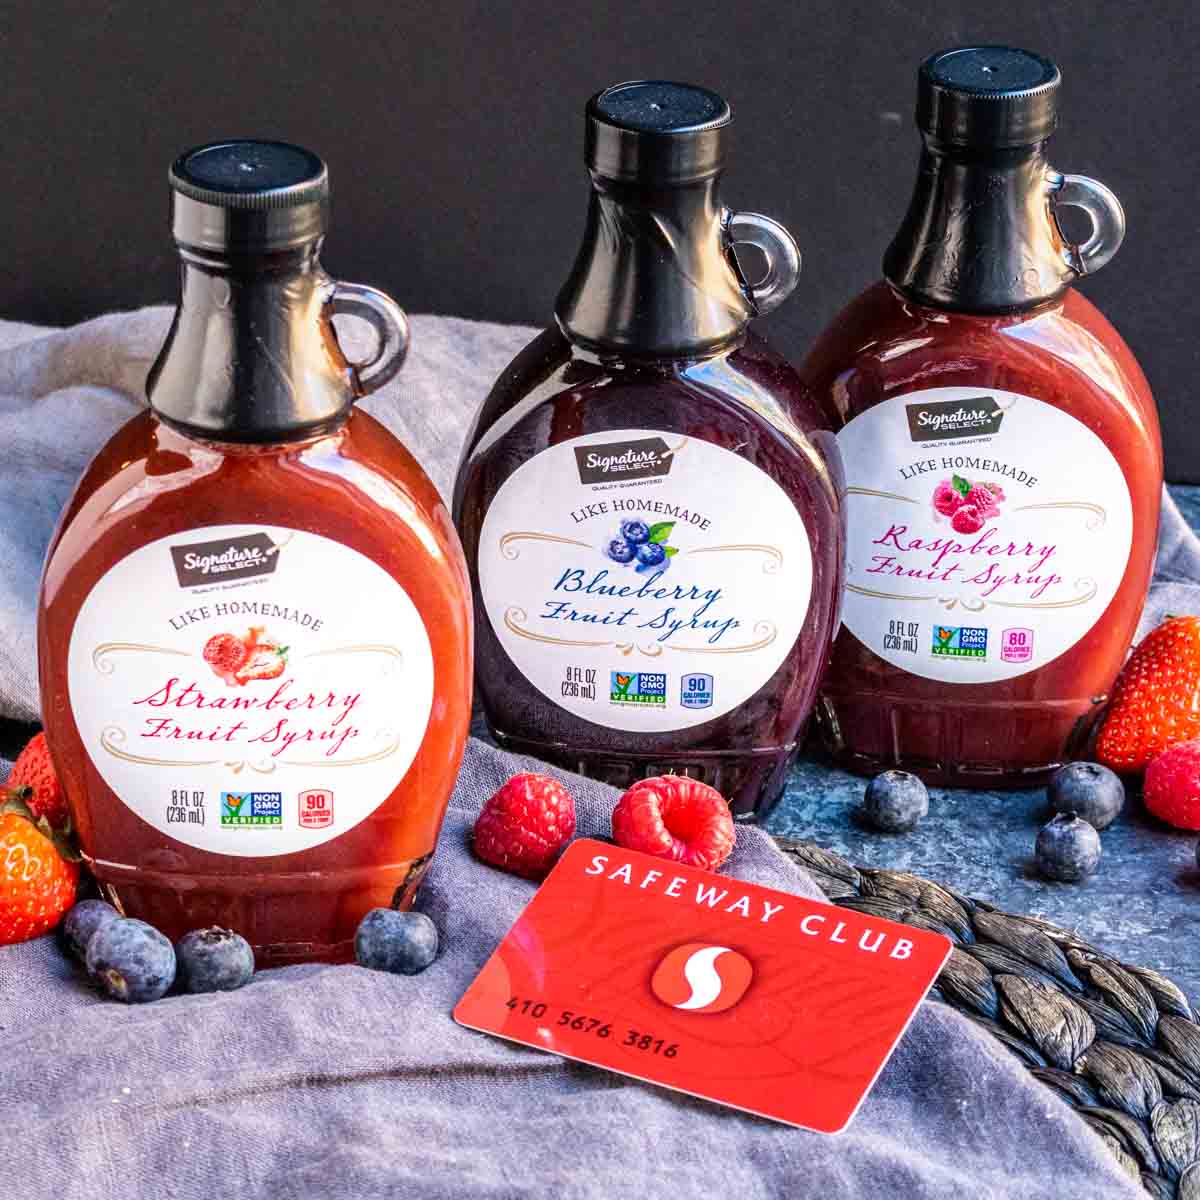 fruit syrup jars from Safeway